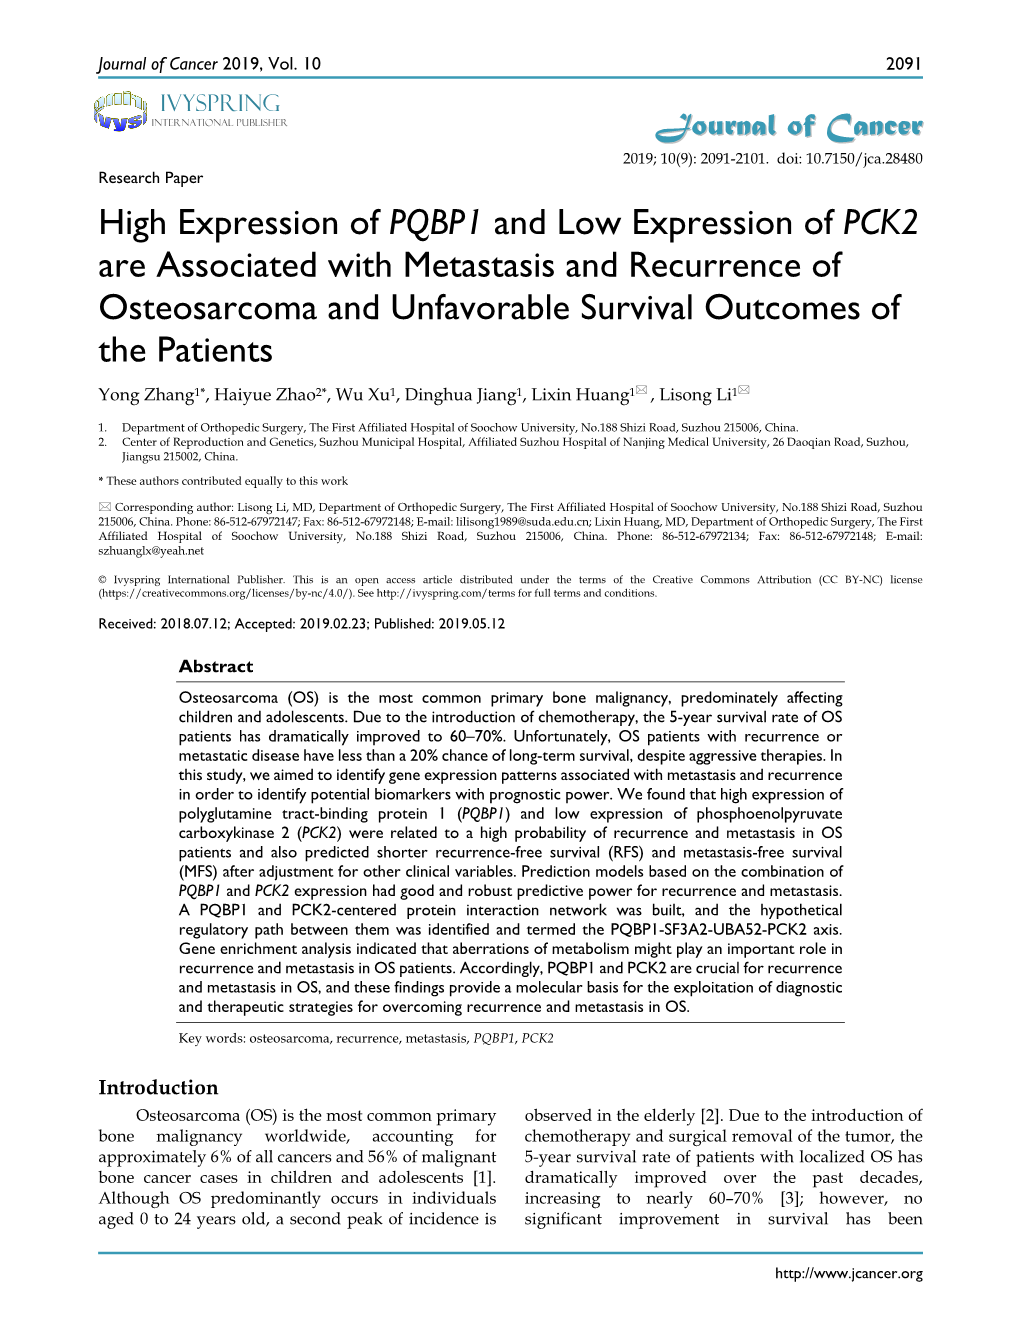 High Expression of PQBP1 and Low Expression of PCK2 Are Associated